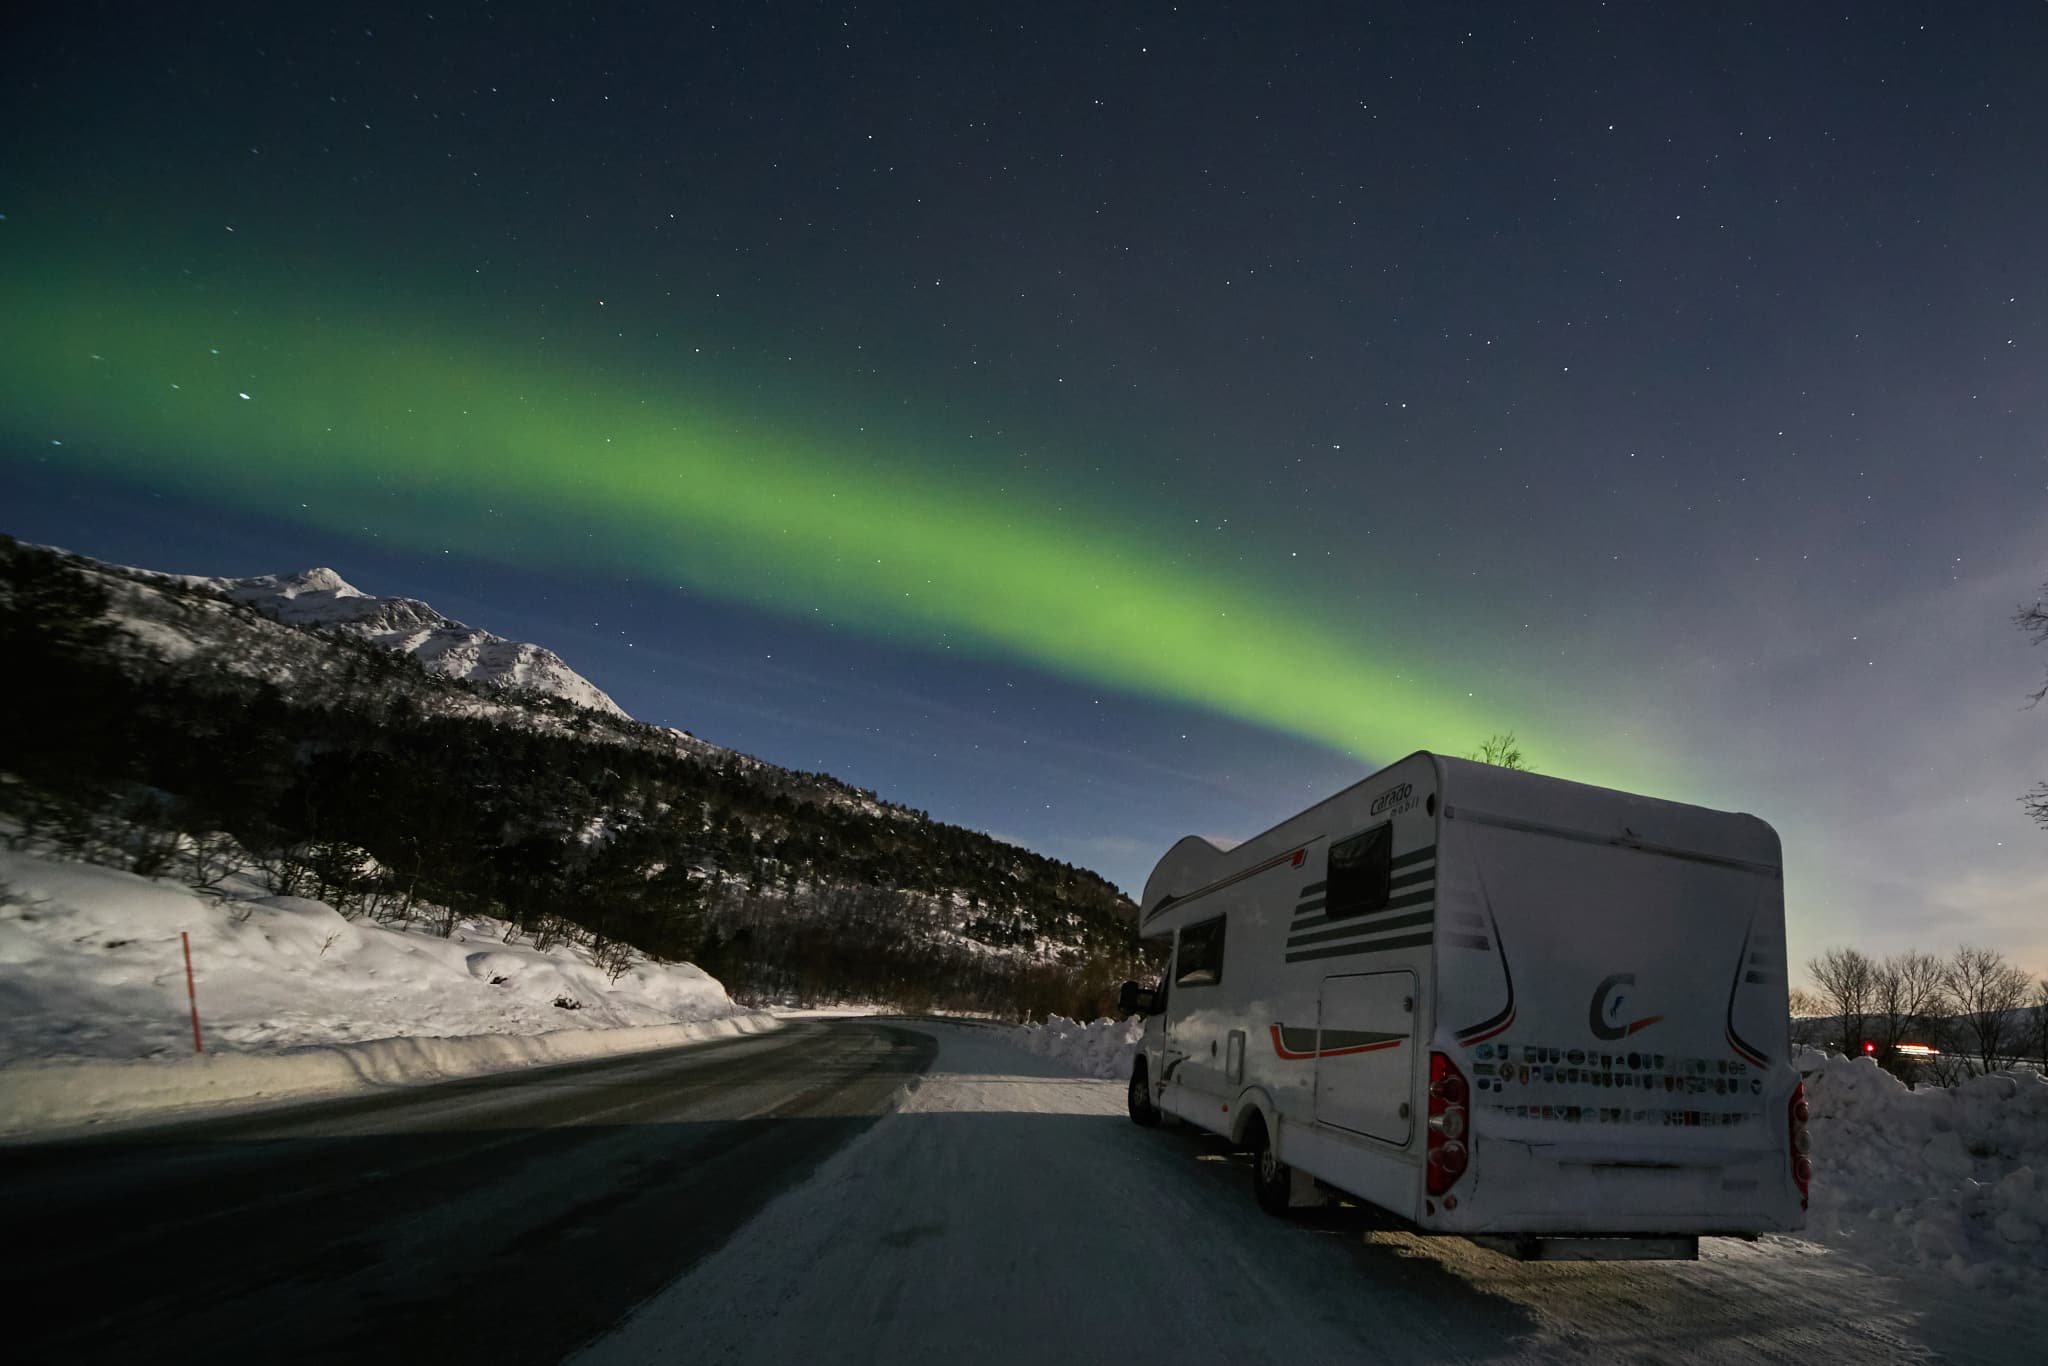 Photographing the Northern Lights: Fortune Favors the Prepared